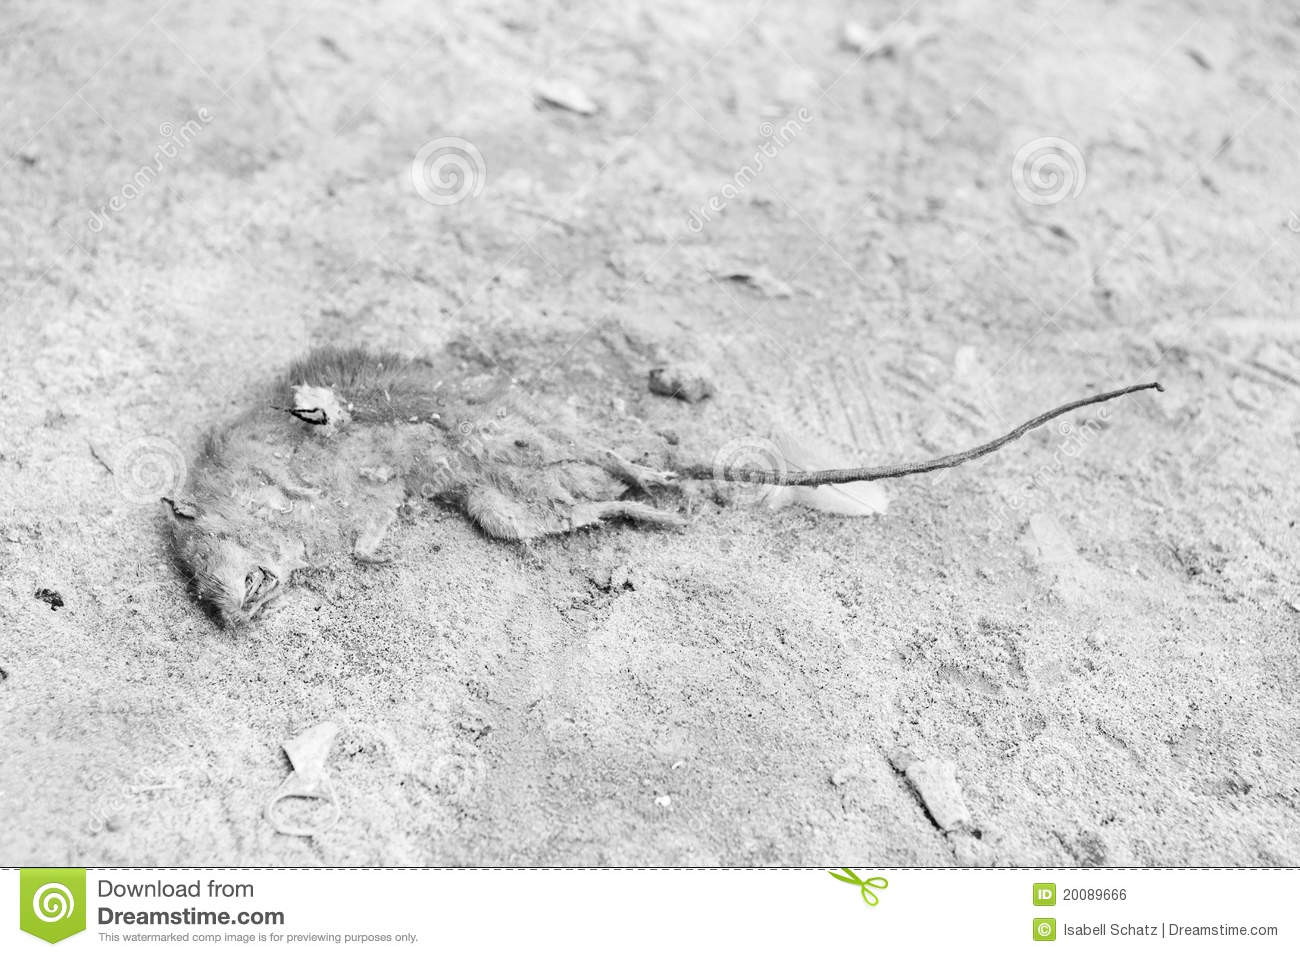 Dead Mouse Rat In The Sand Royalty Free Stock Image   Image  20089666